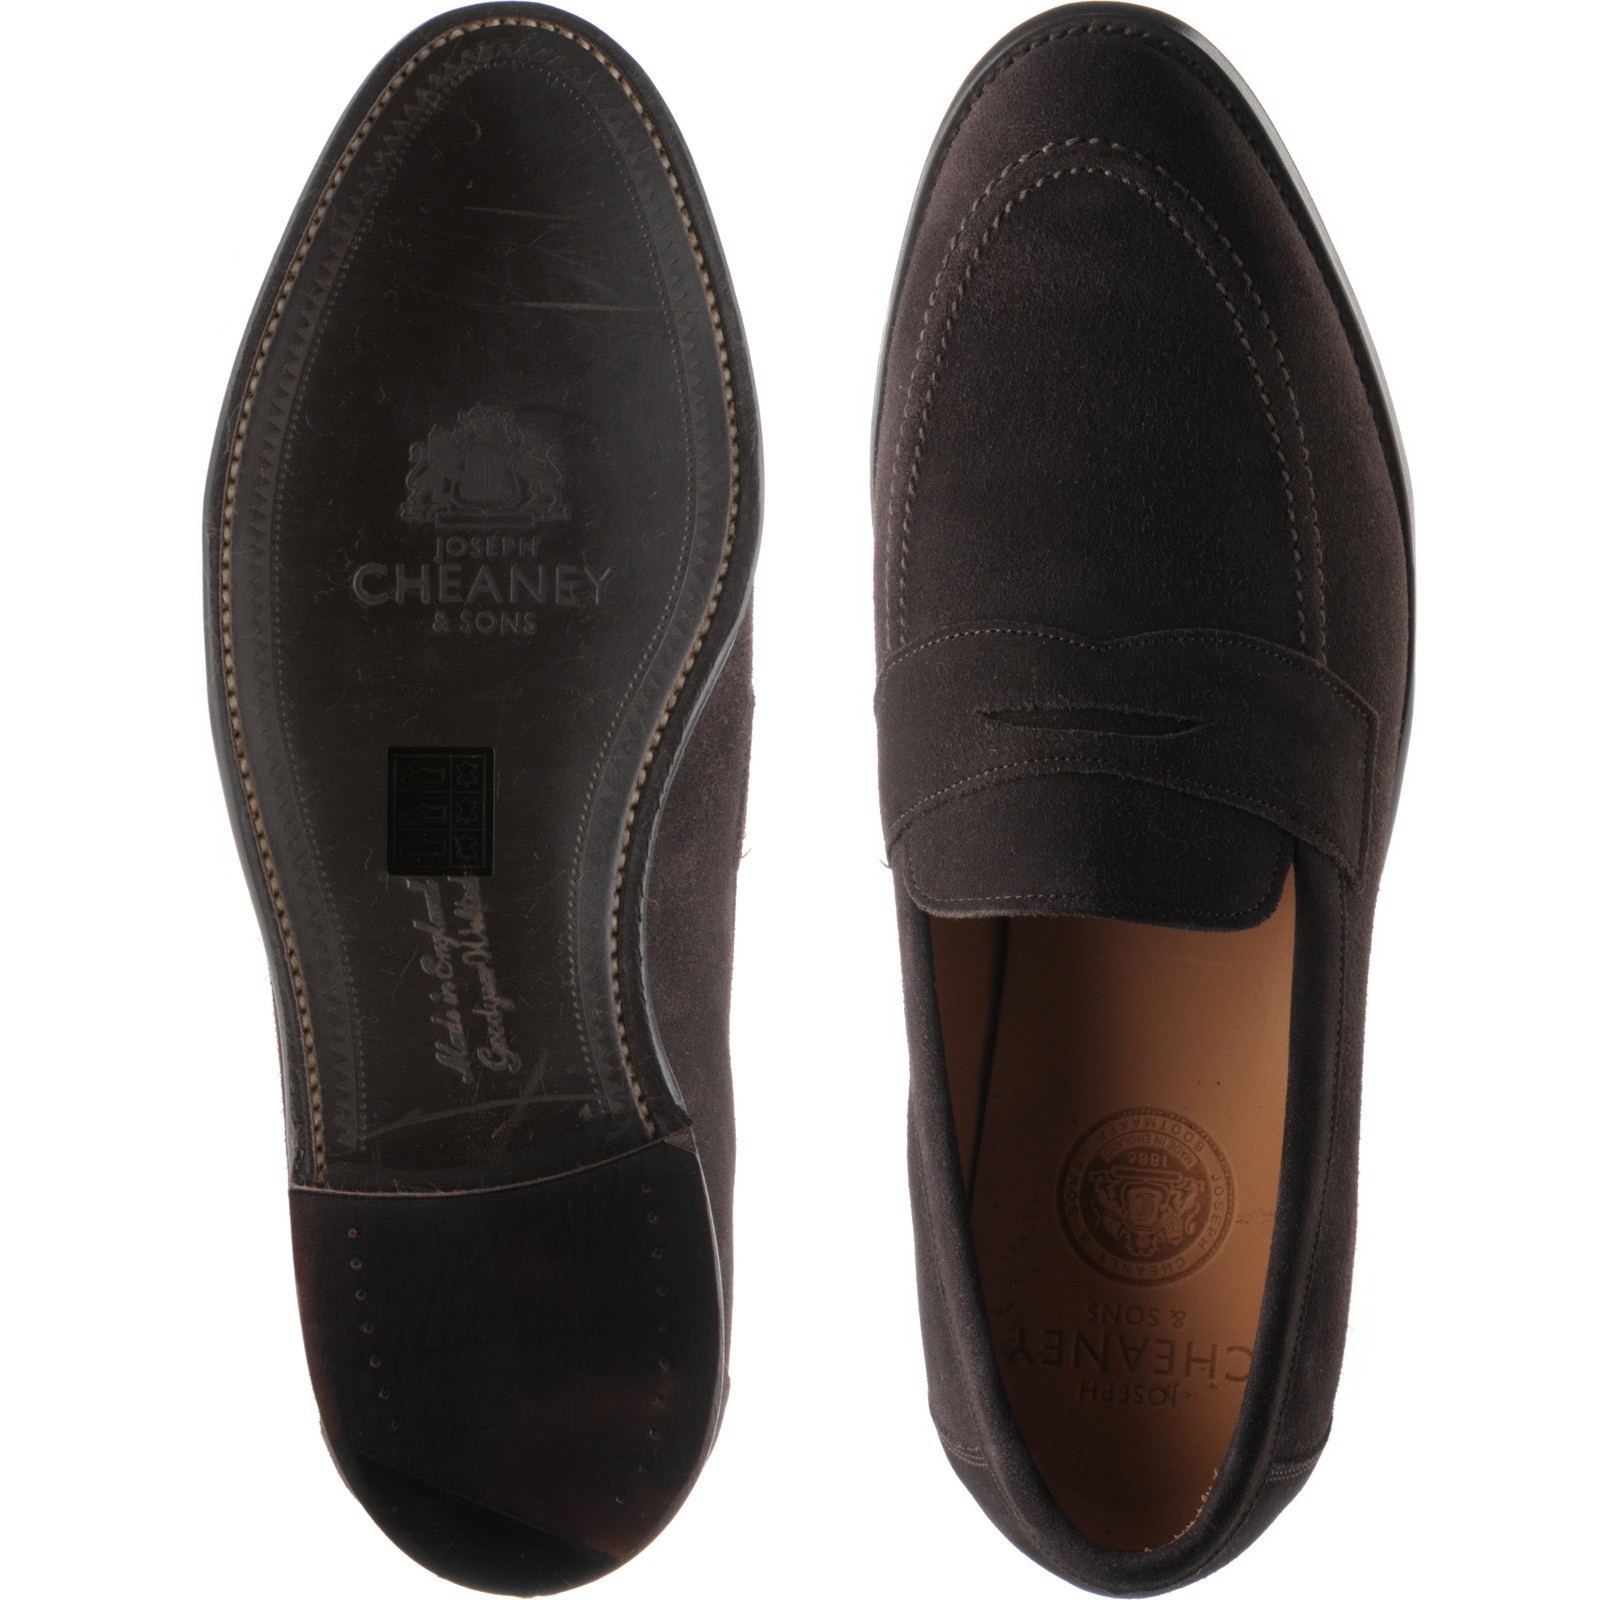 Cheaney shoes | Cheaney of England | Hadley loafers in Brown Suede at ...